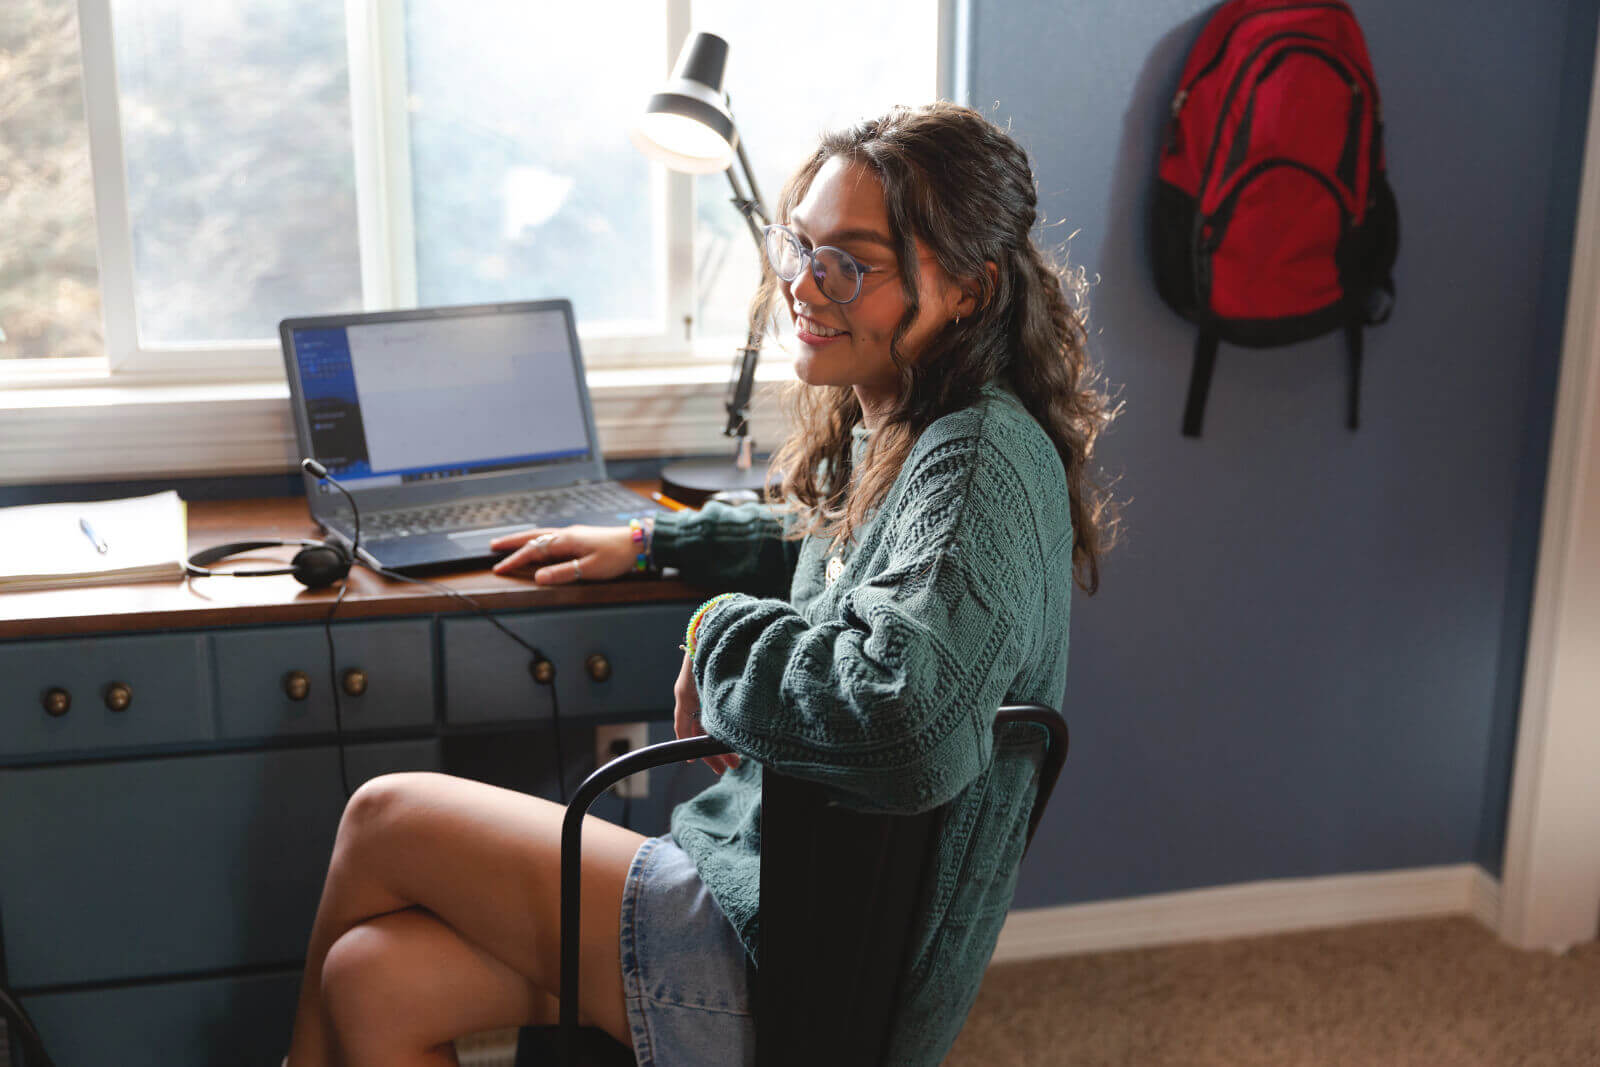 A young lady works at her desk in her bedroom